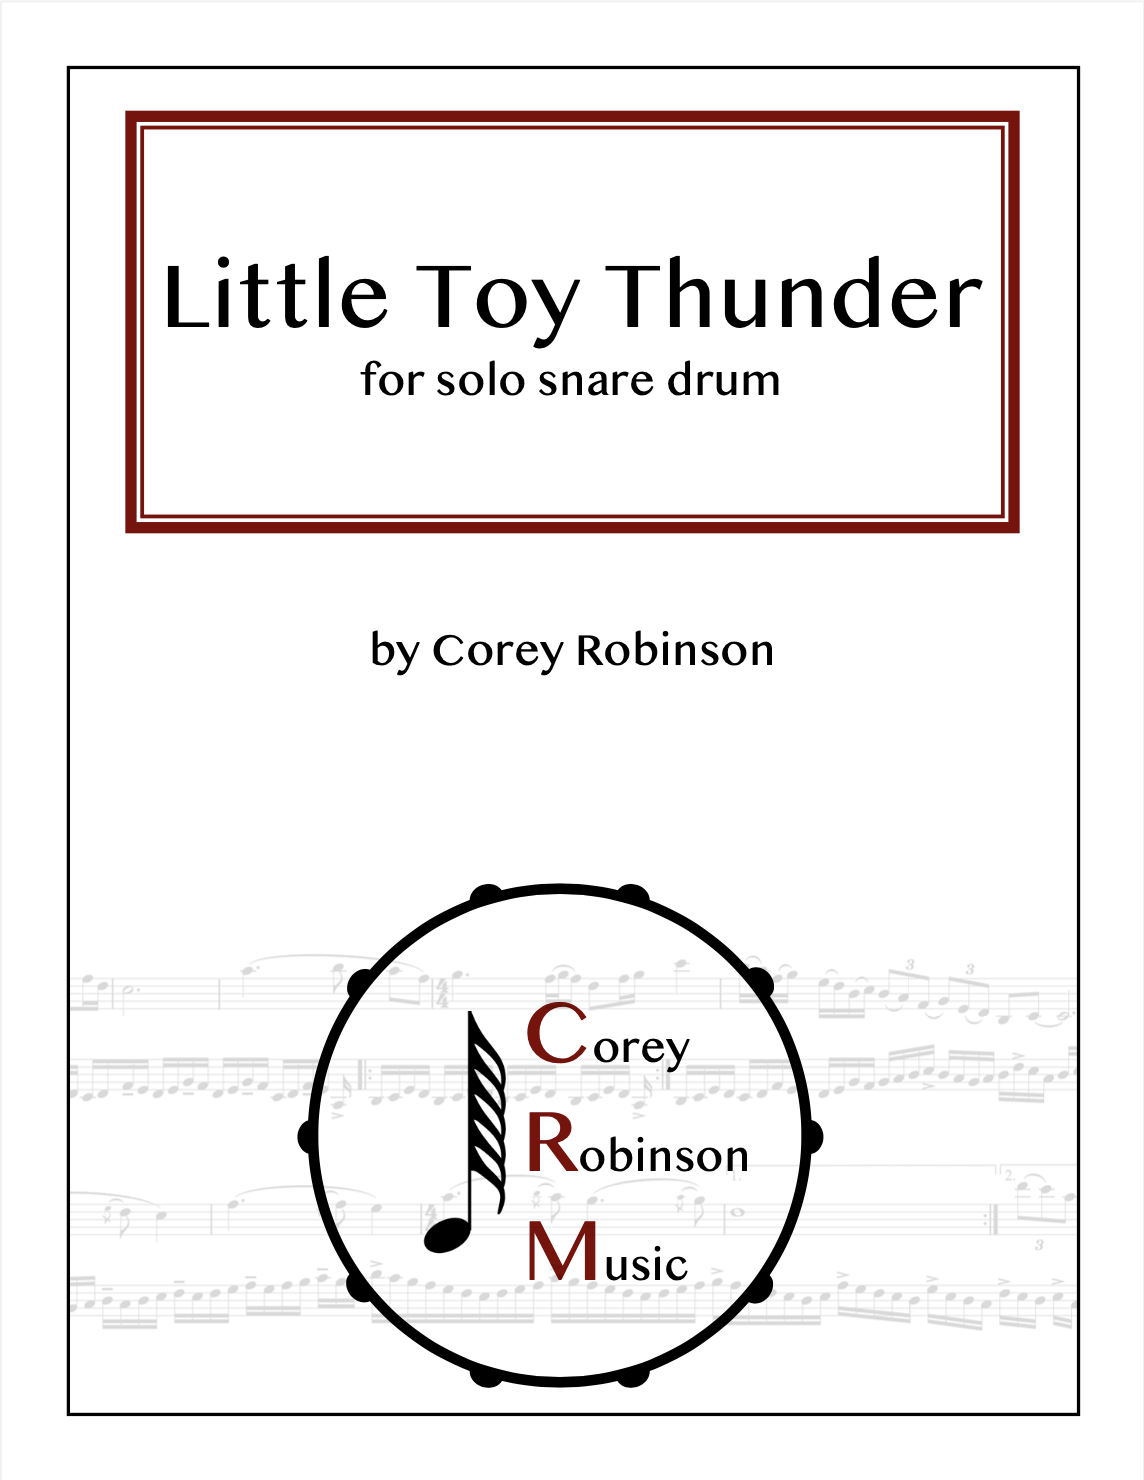 Little Toy Thunder by Corey Robinson